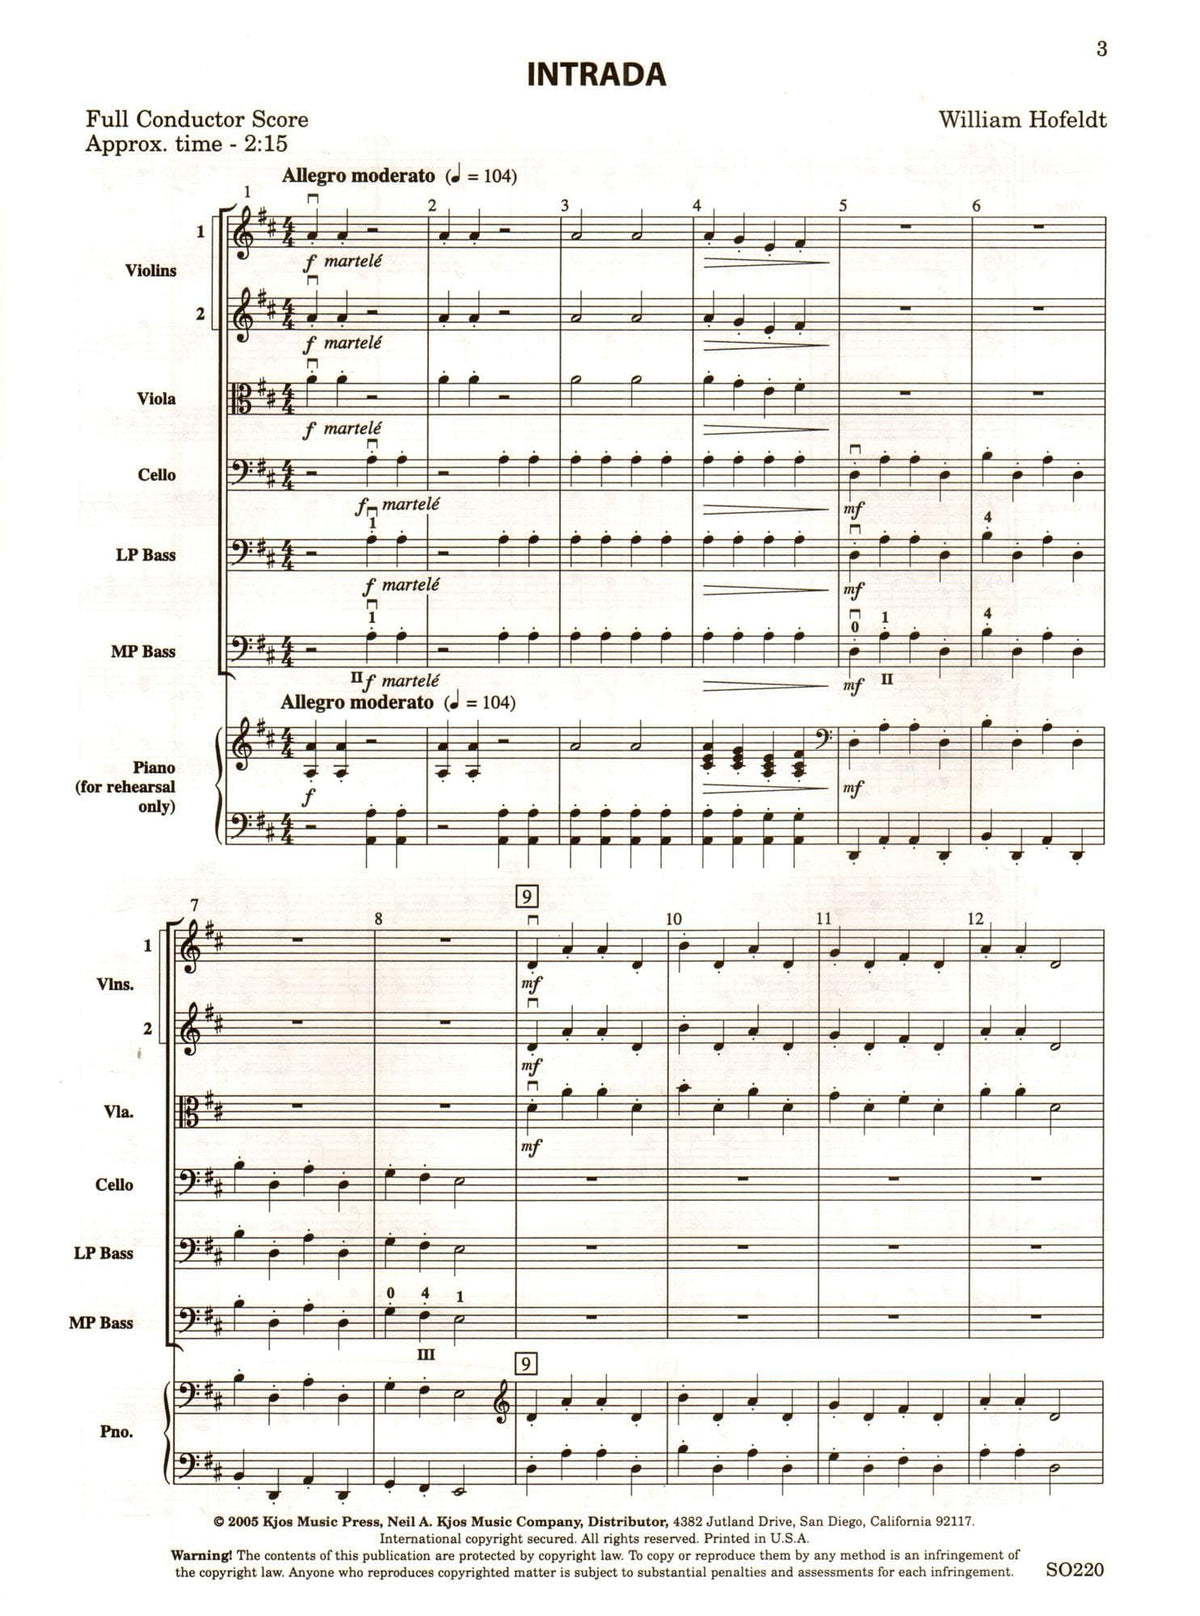 Hofeldt, William - Intrada for String Orchestra - Score and Parts - Kjos Music Co